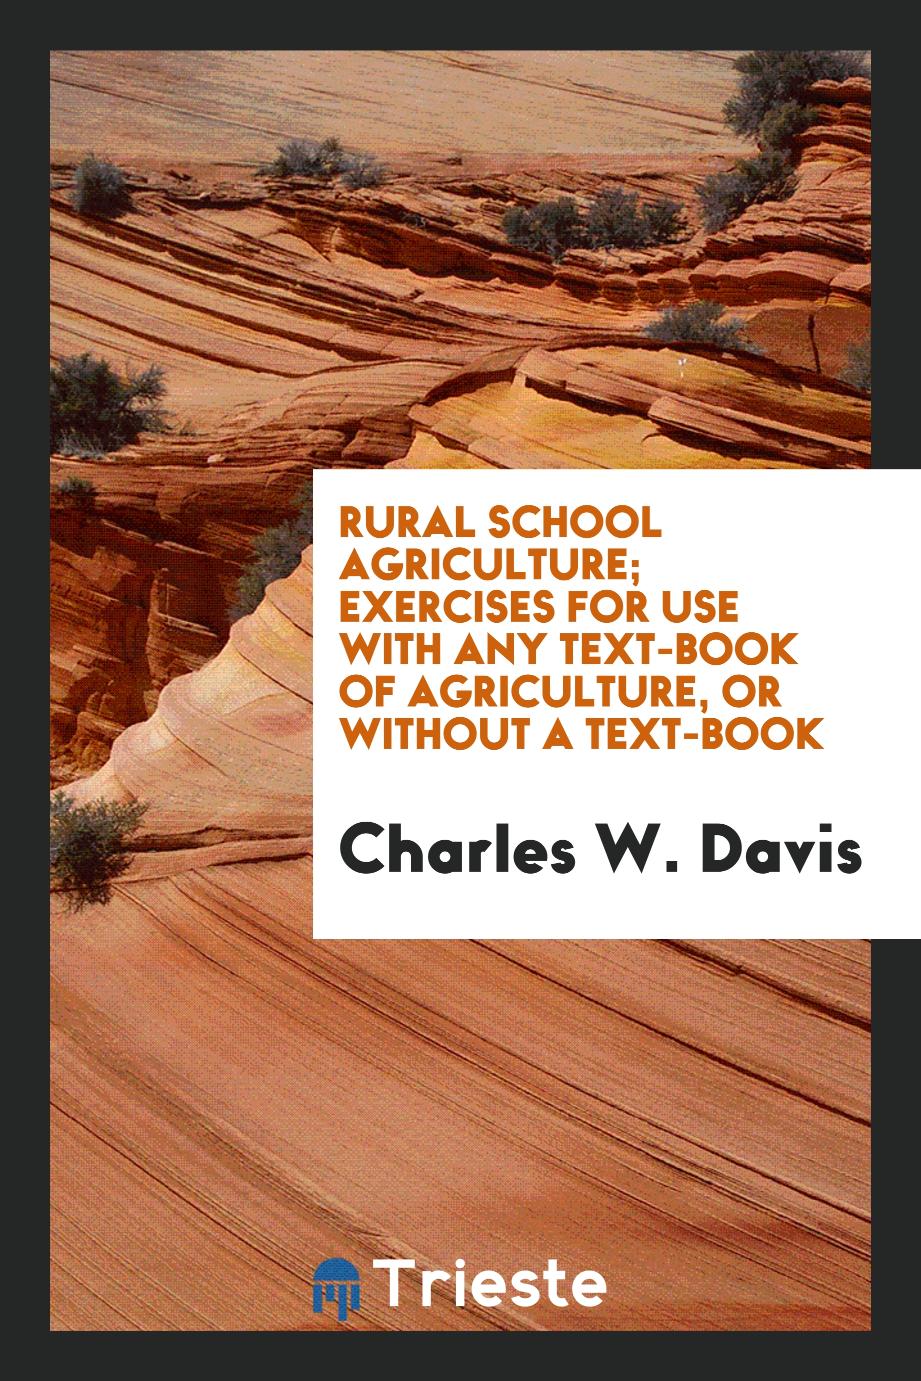 Rural school agriculture; exercises for use with any text-book of agriculture, or without a text-book